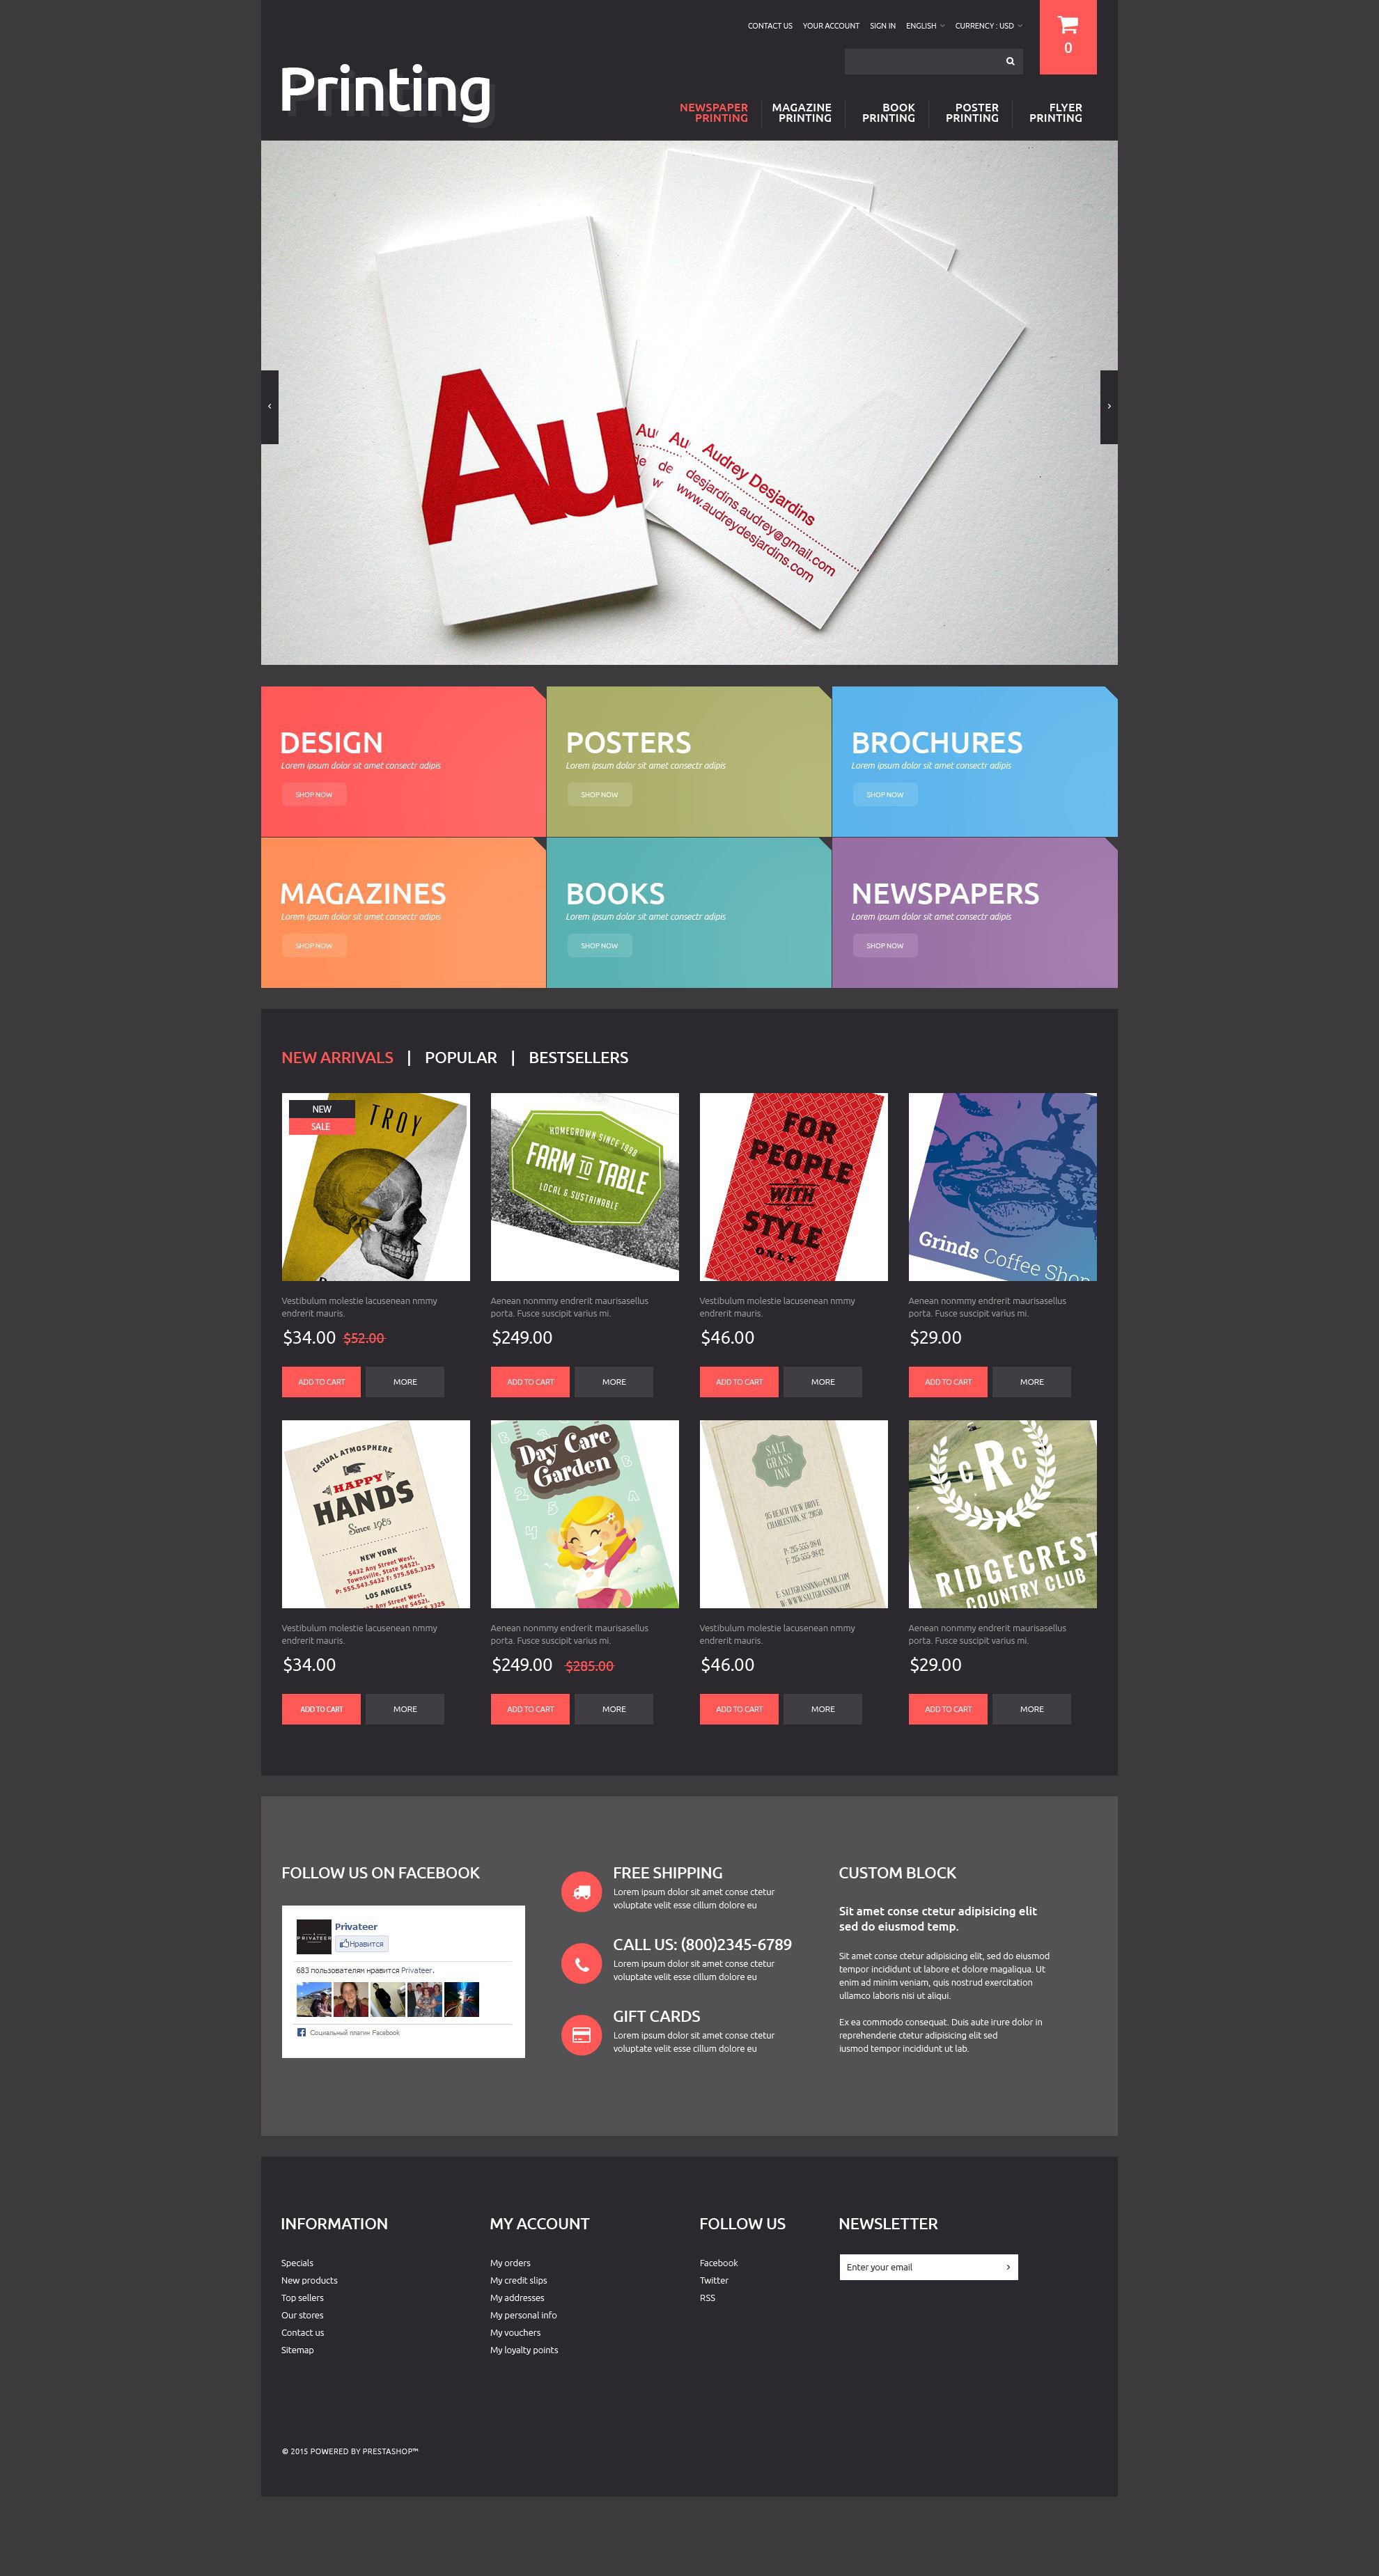 printing-company-website-template-free-download-the-biggest